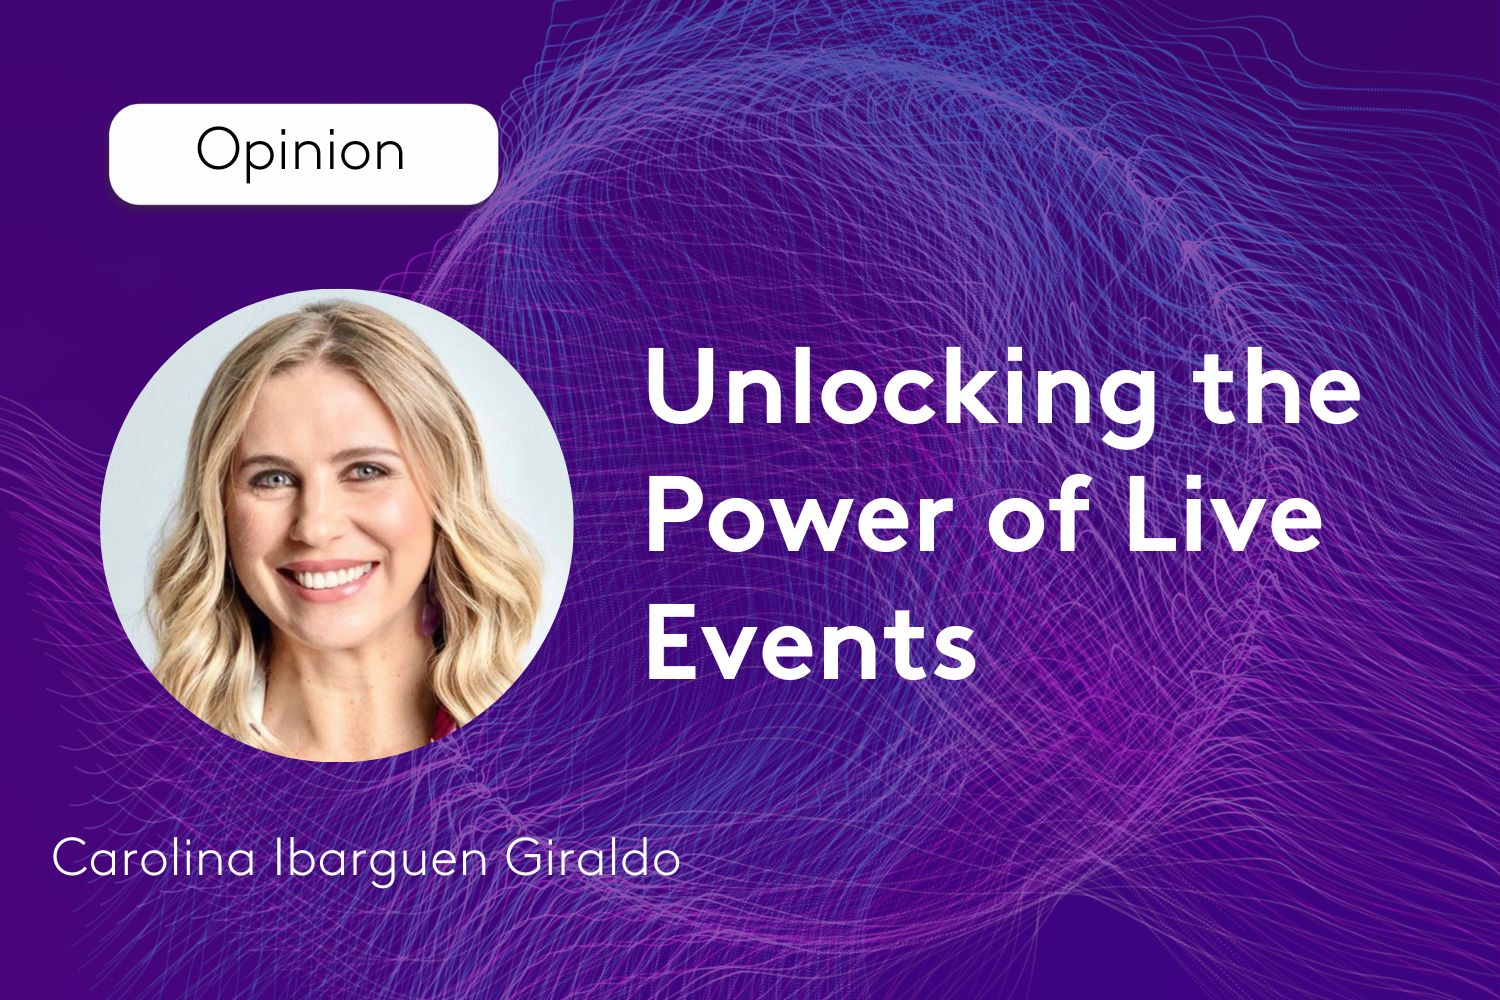 Unlocking the Power of Live Events